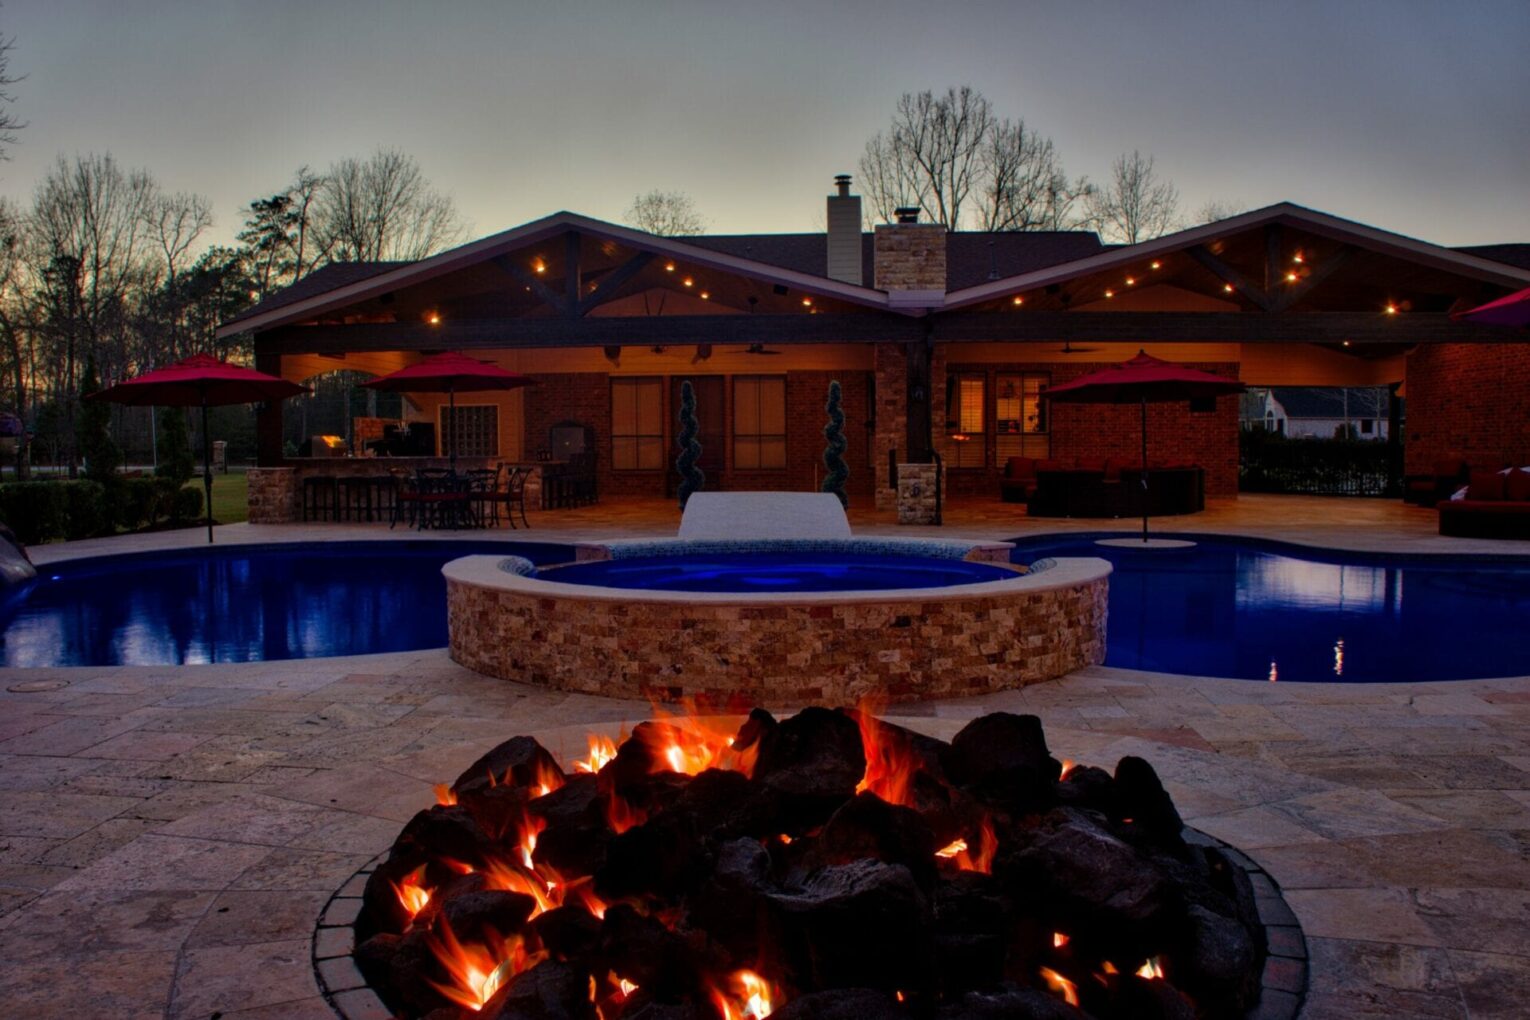 A fire pit in the middle of an outdoor pool.